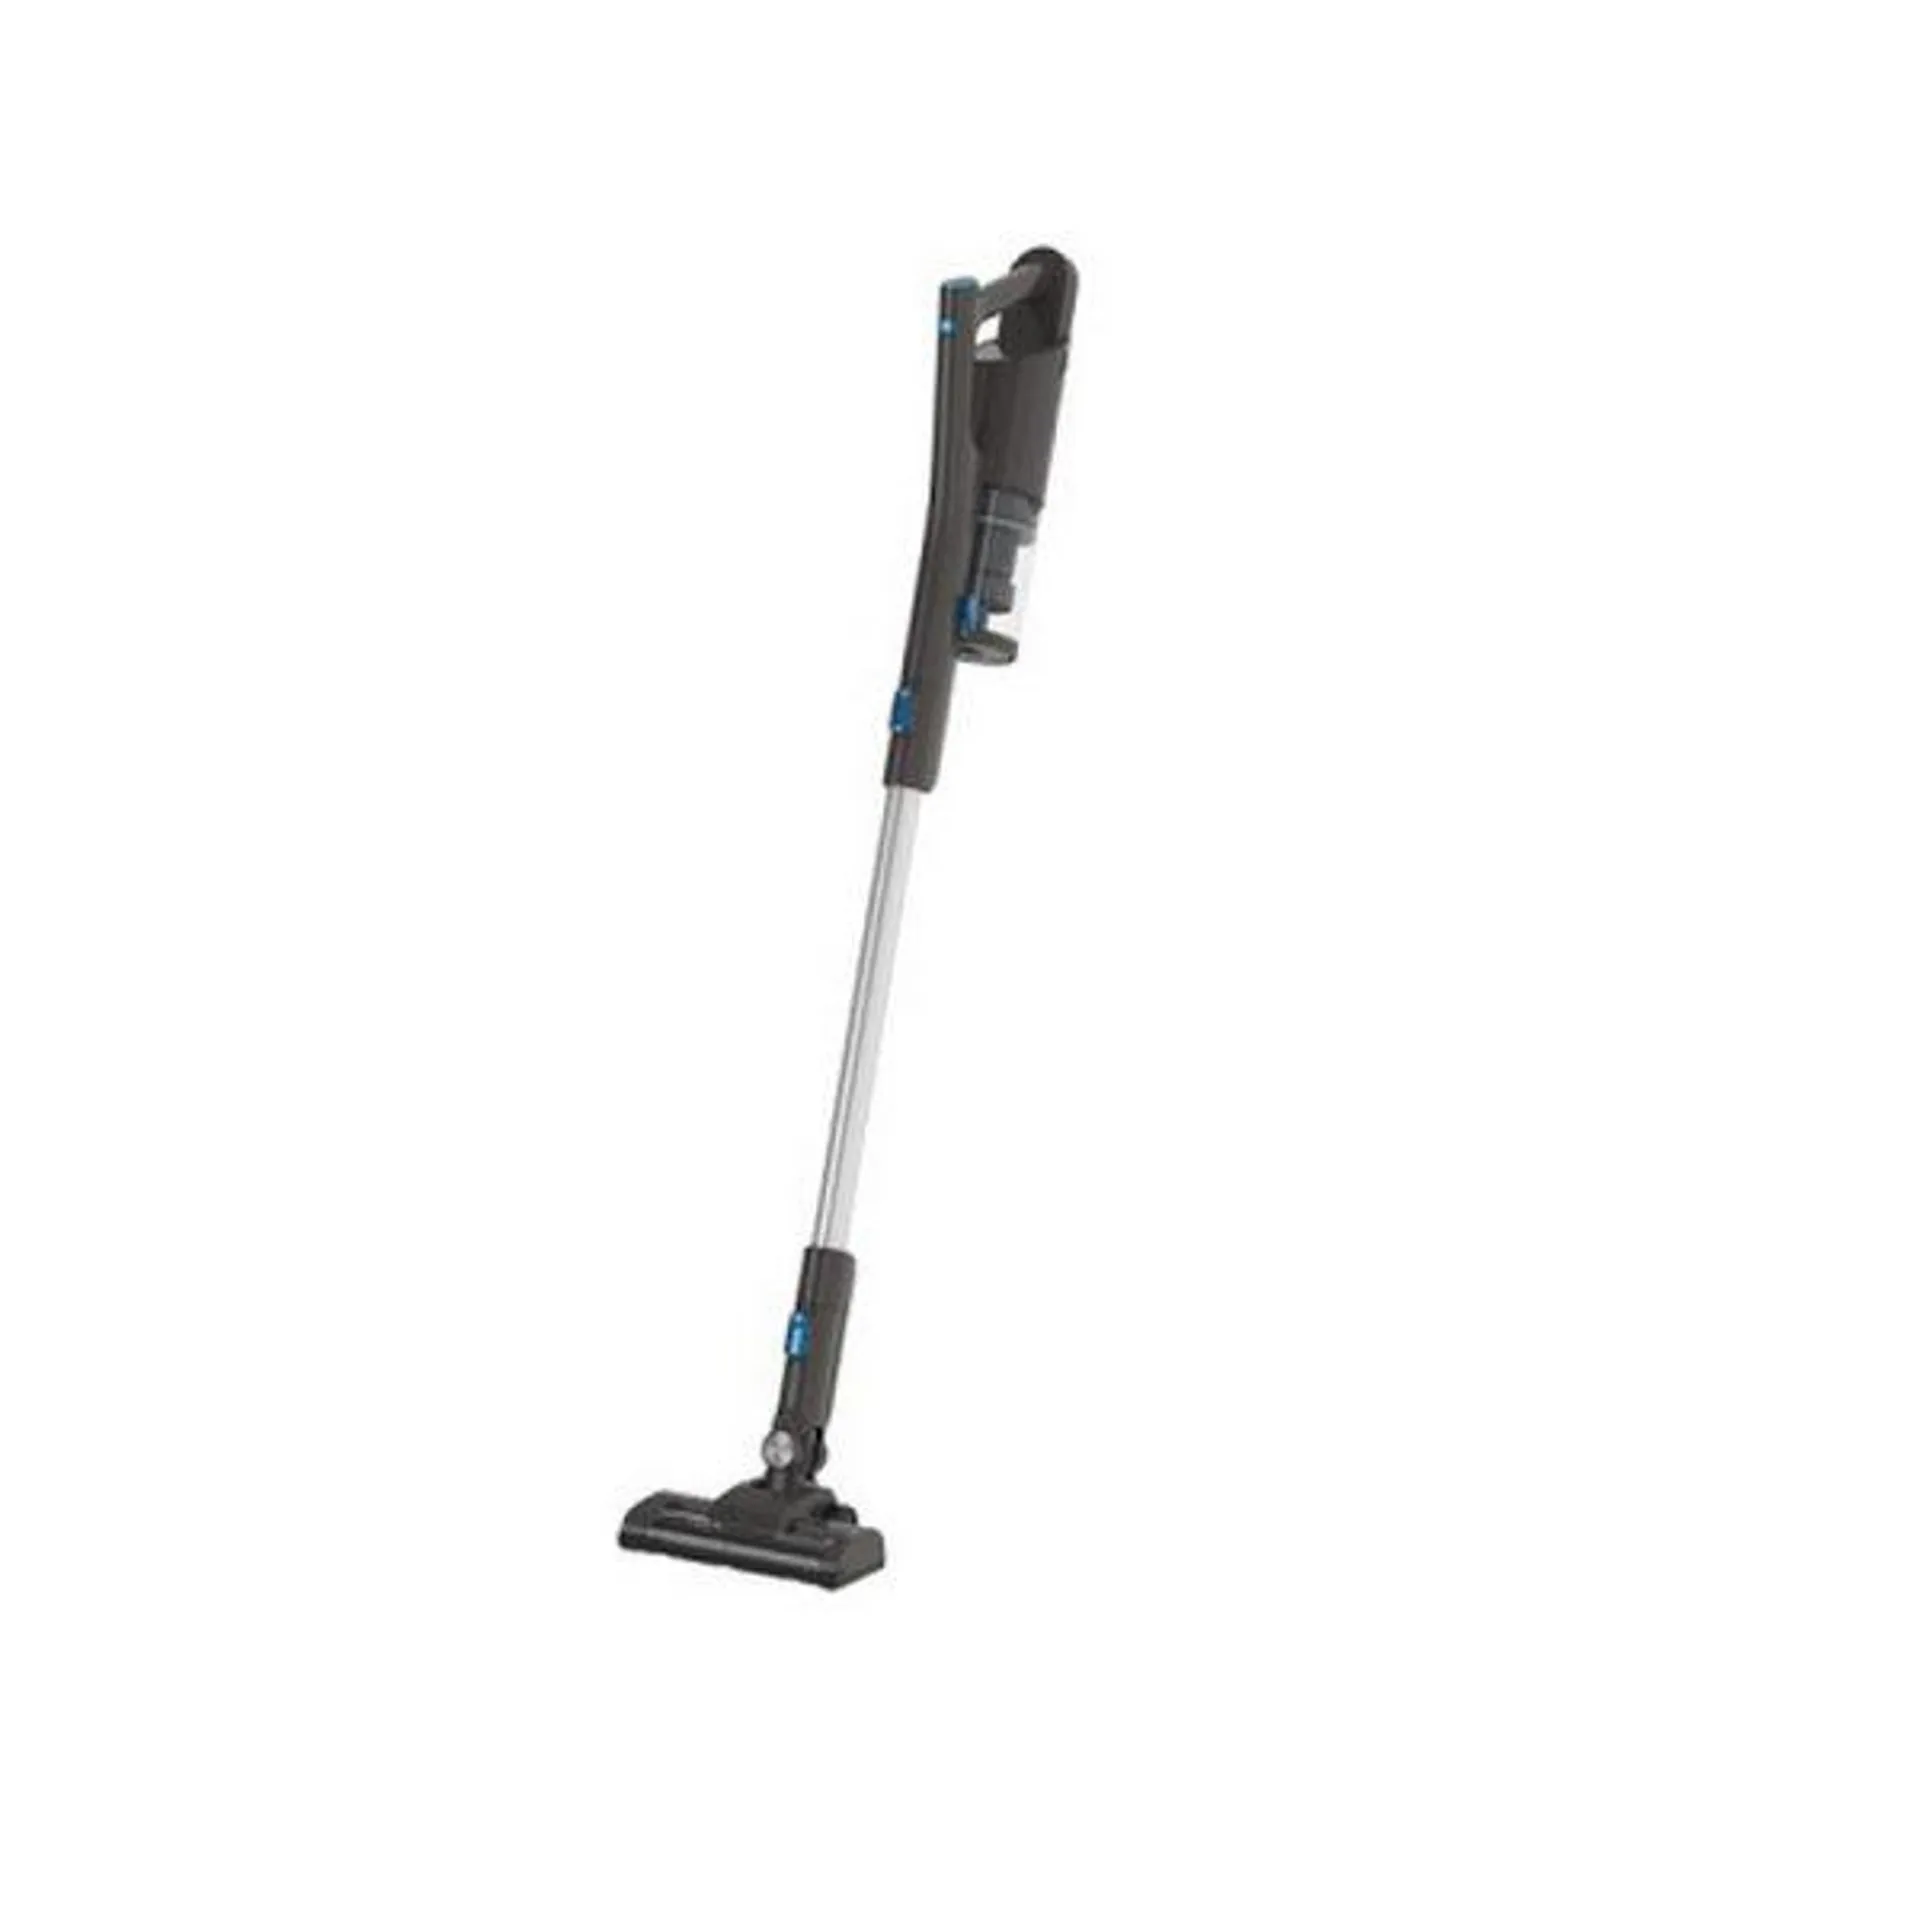 Morphy Richards Upright 2 in 1 Cordless Vacuum Cleaner